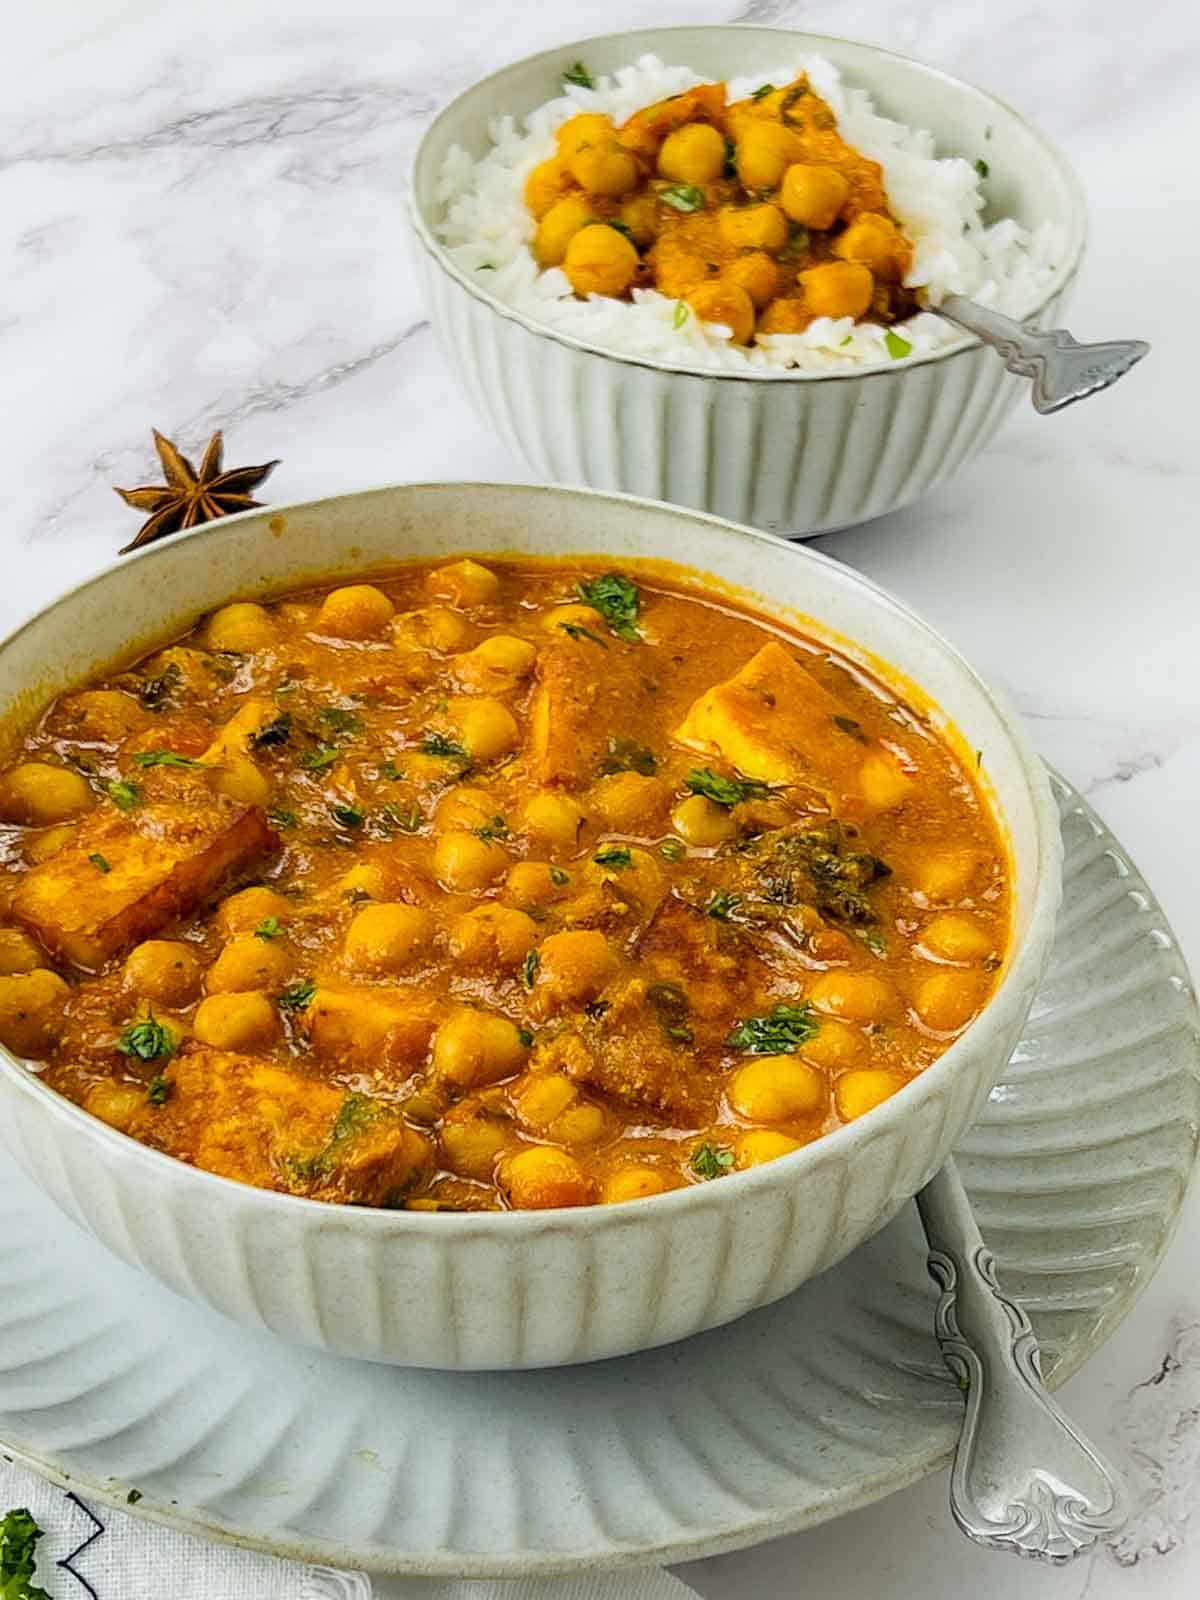 Chana paneer or chickpea spinach curry in a white bowl.